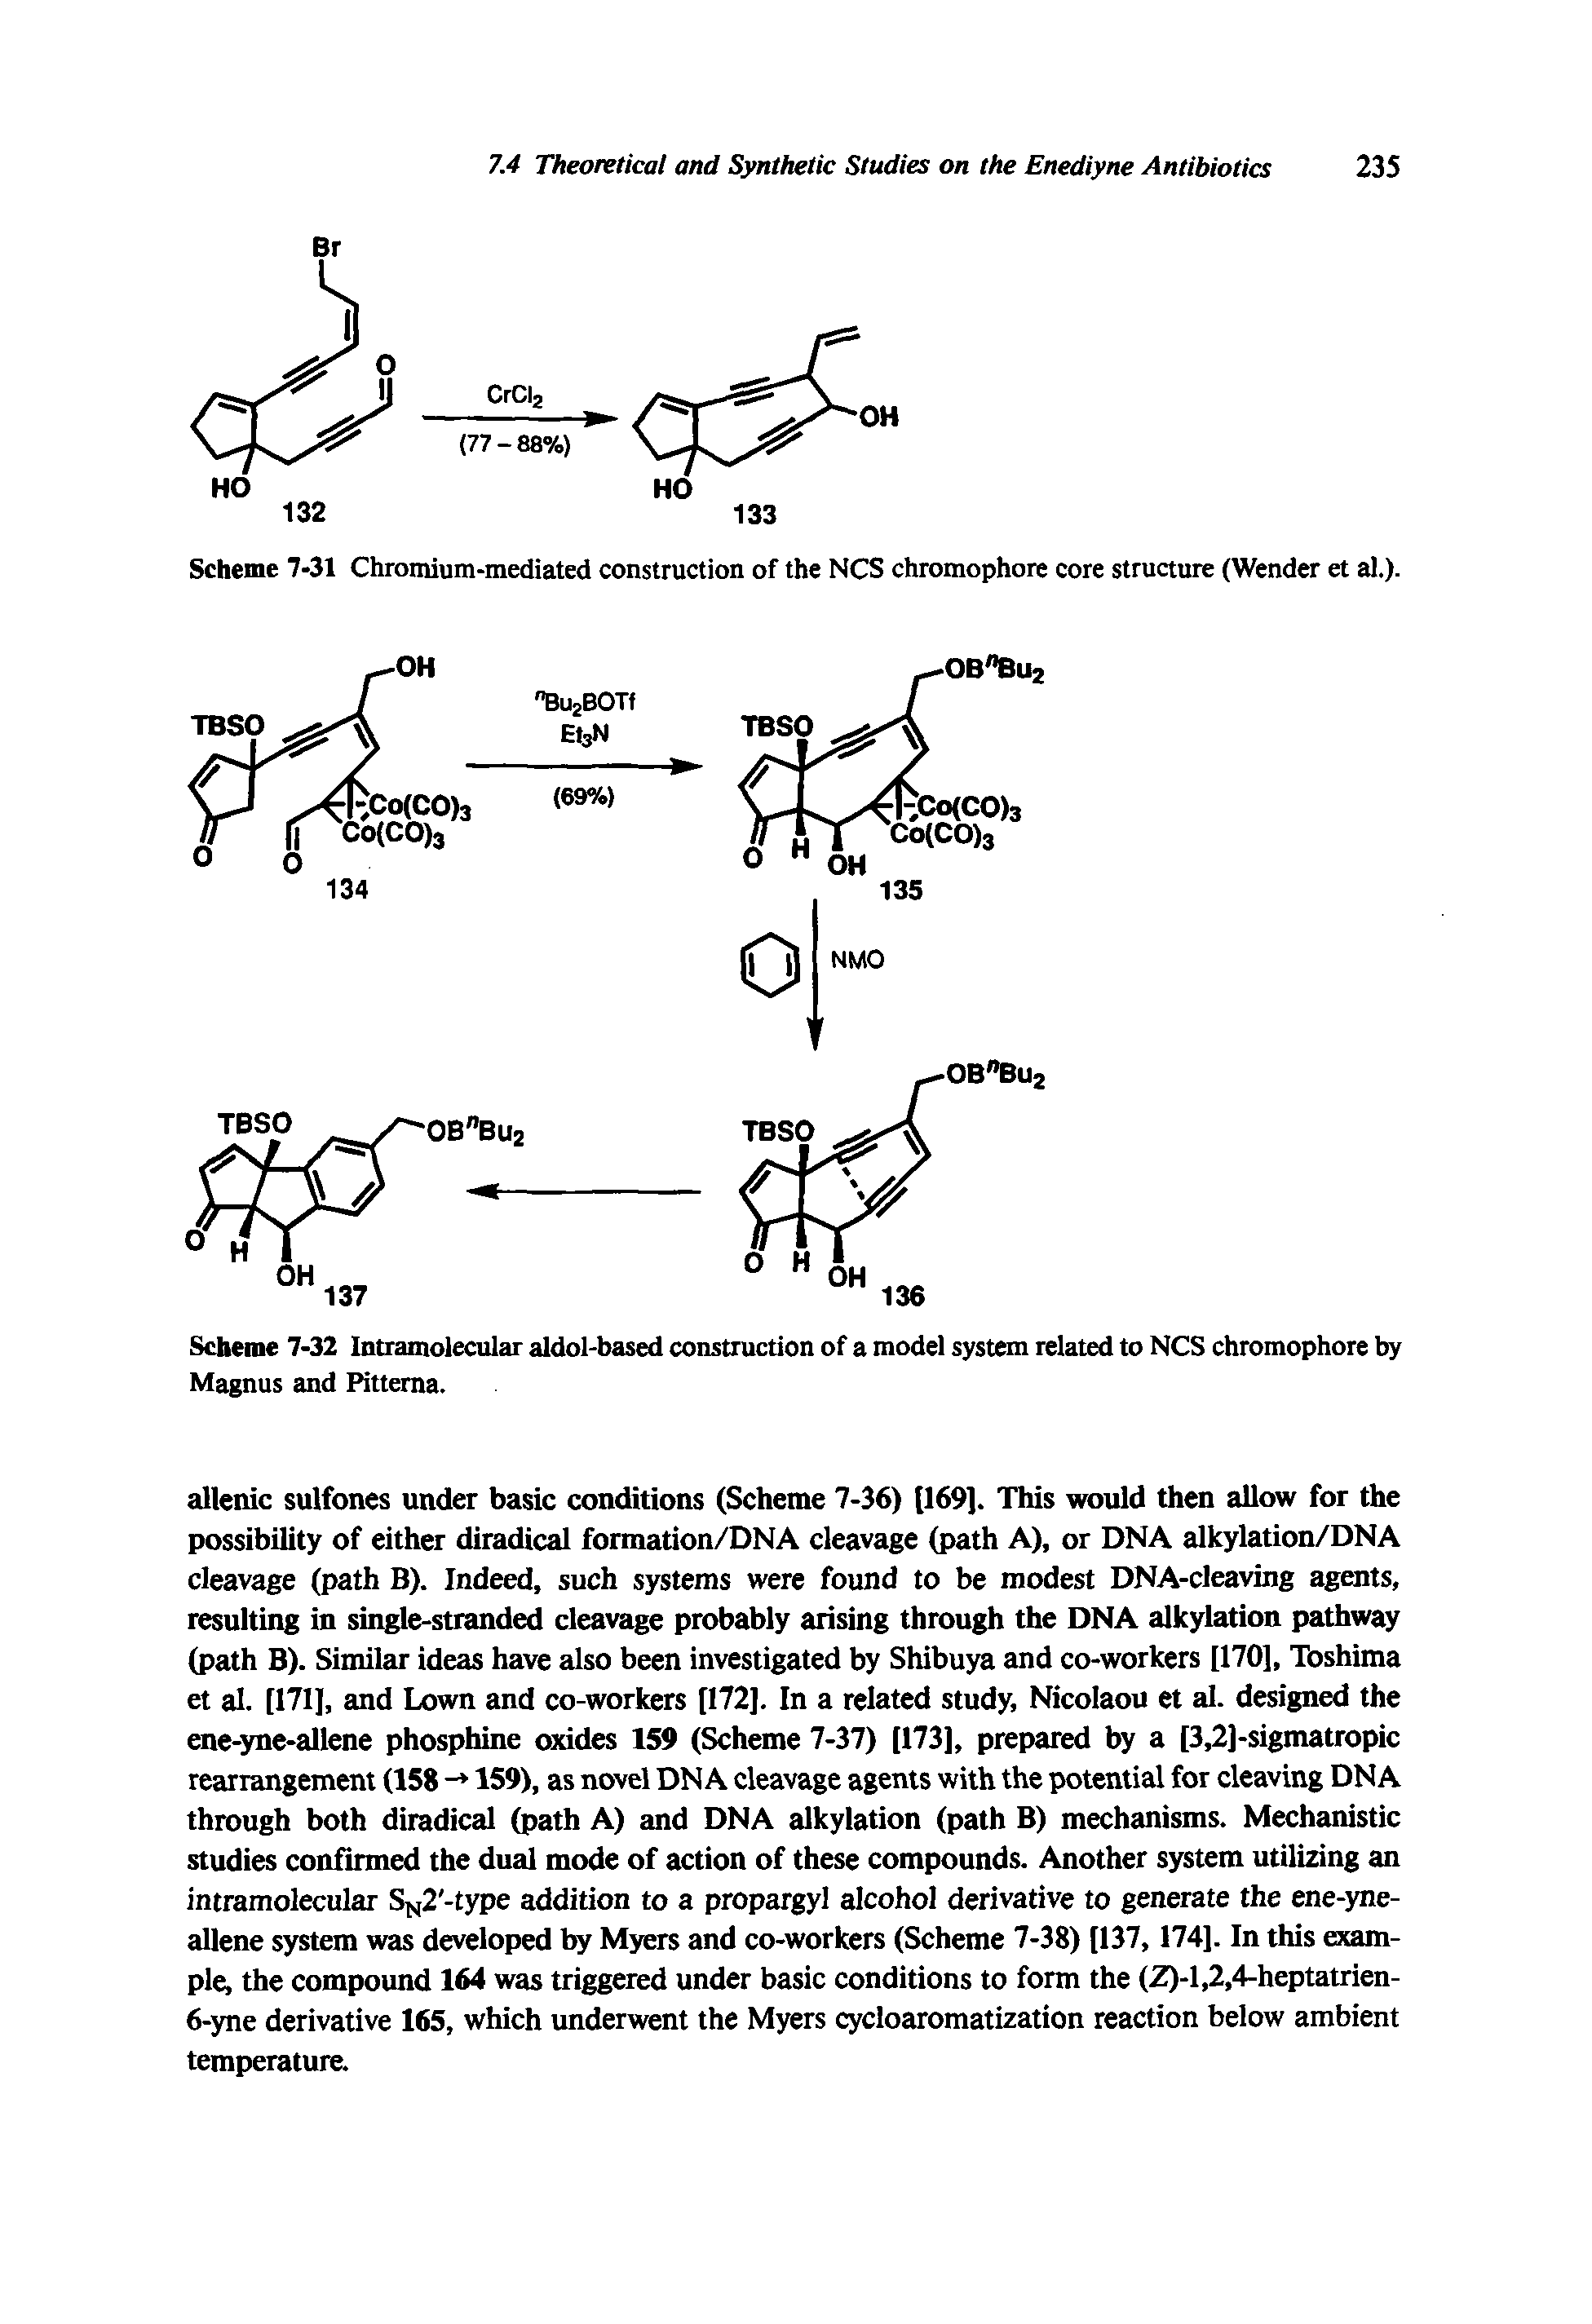 Scheme 7-32 Intramolecular aldol-based construction of a model system related to NCS chromophore by Magnus and Pittema.